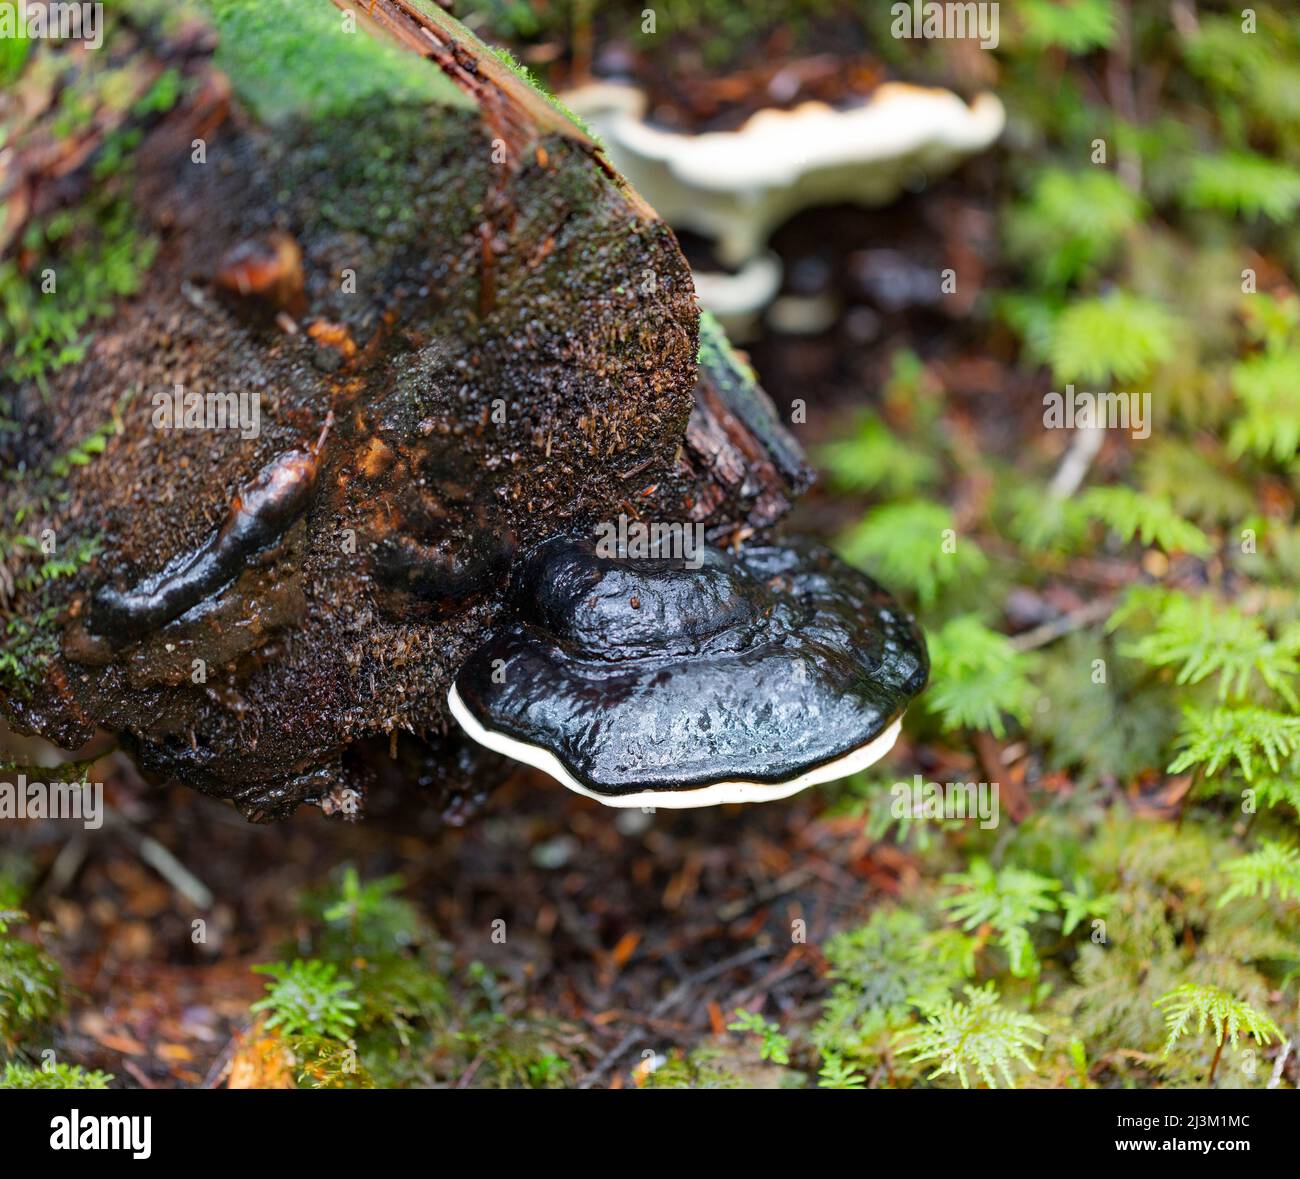 Close-up detail of a fungus growing from a wet log in a forest; British Columbia, Canada Stock Photo